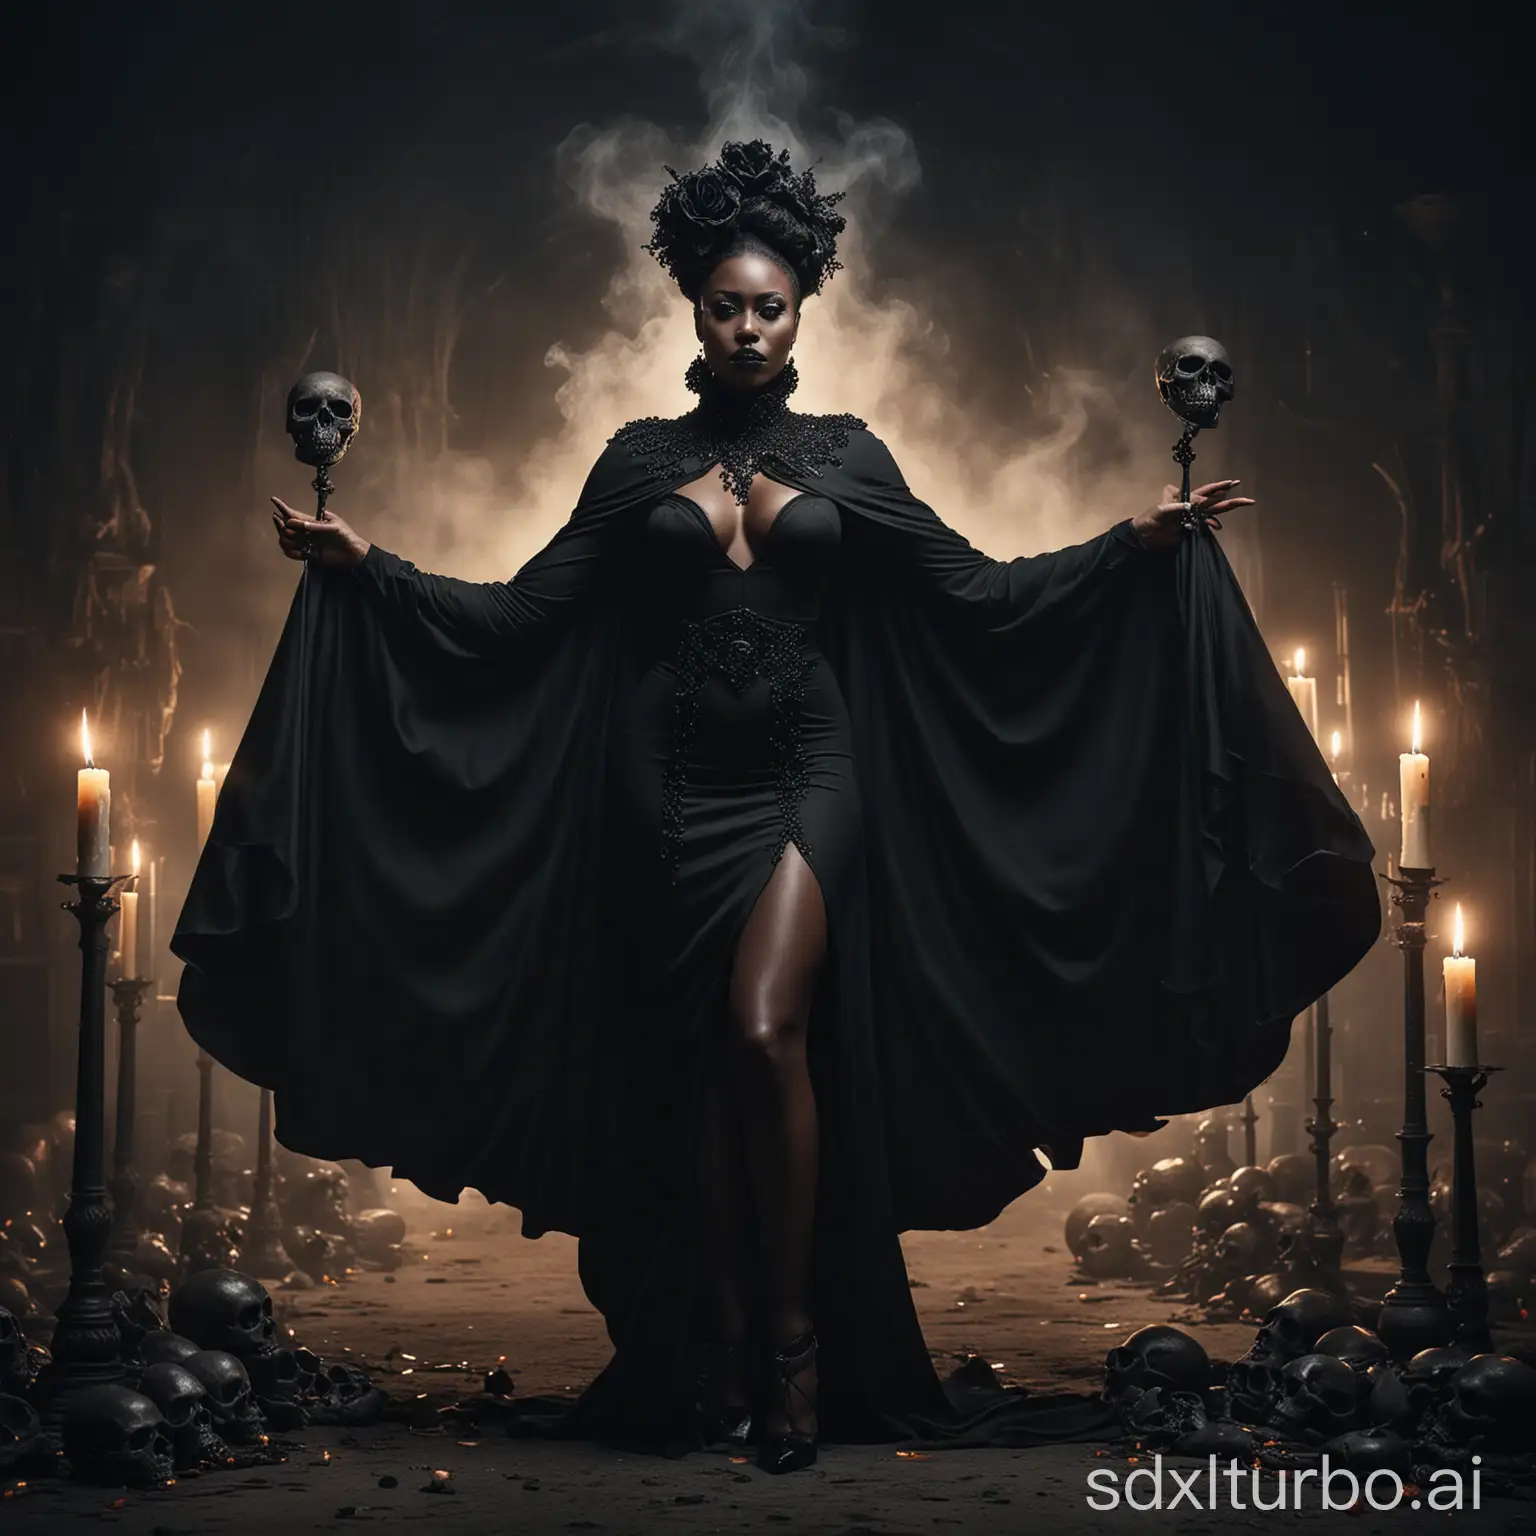 Majestic-Black-Woman-in-Enigmatic-Surroundings-with-Skull-Accents